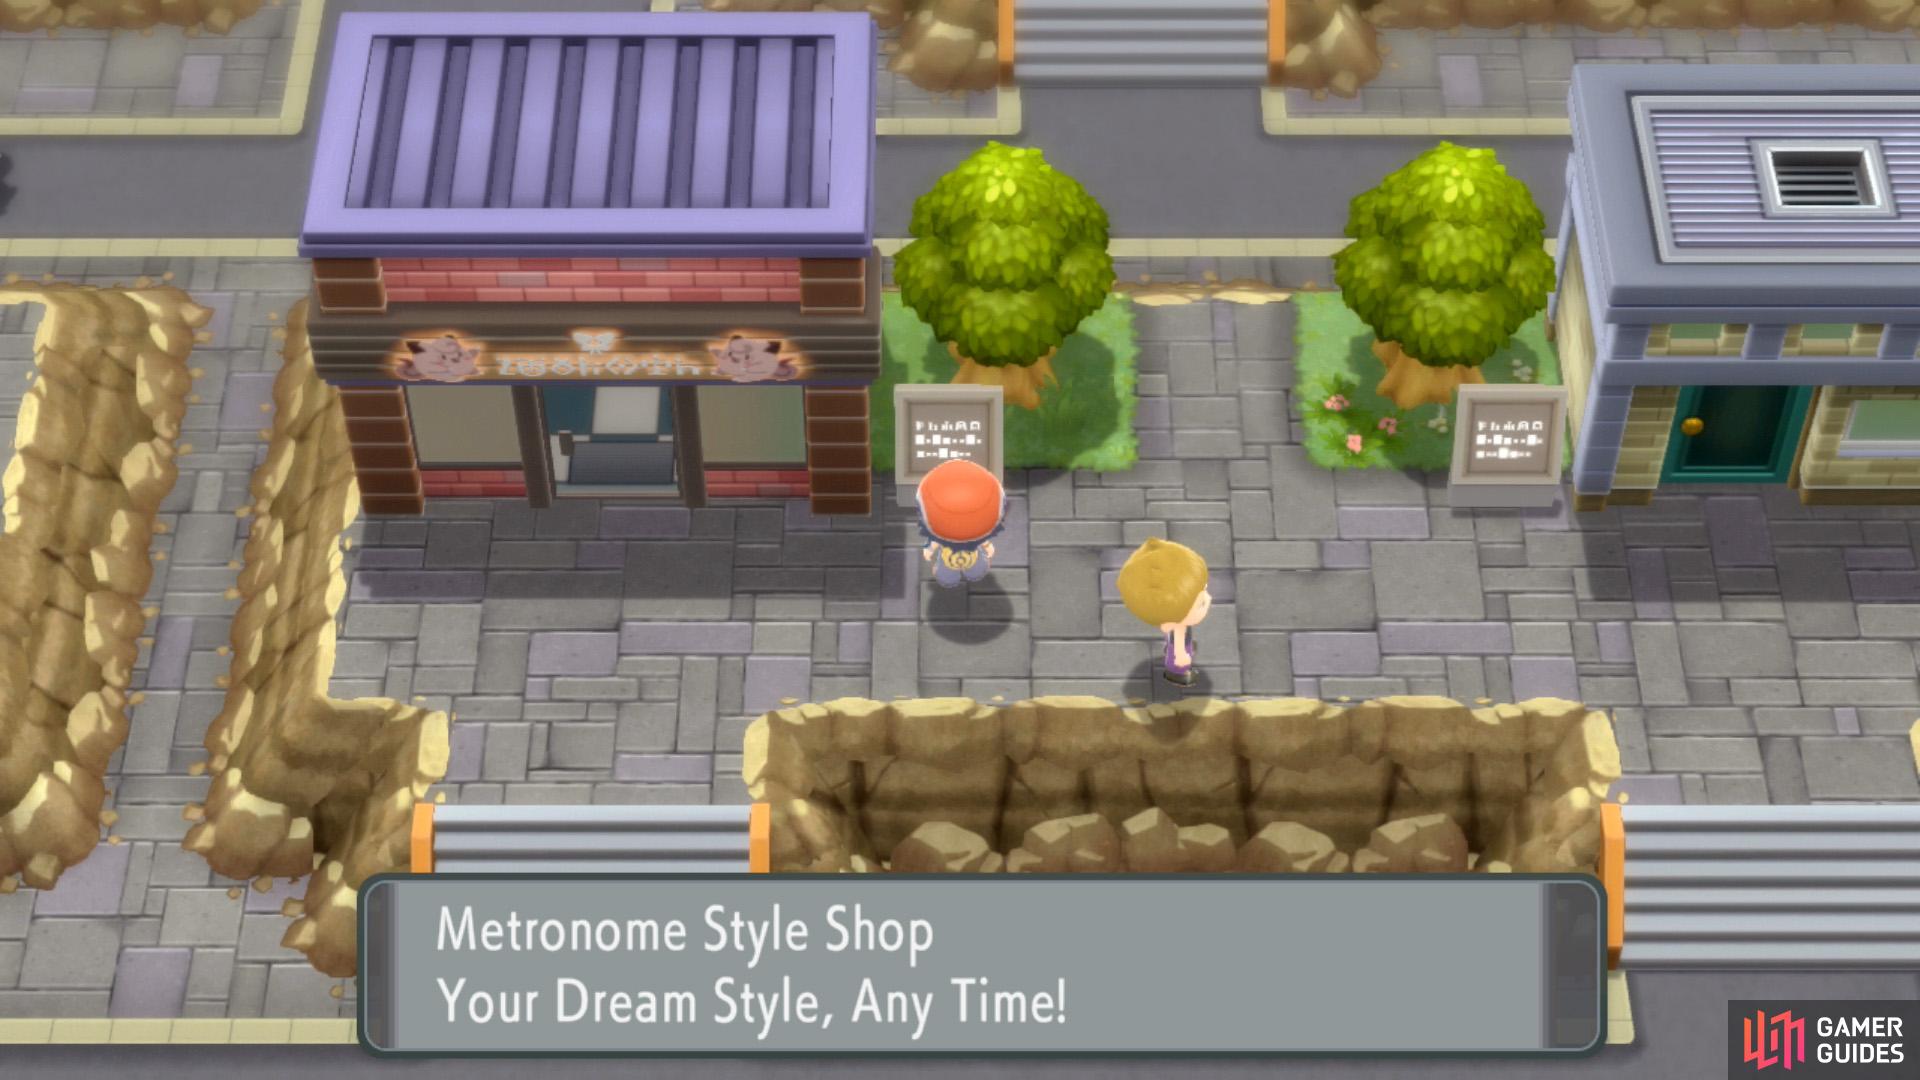 The Metronome Style Shop in Veilstone City.